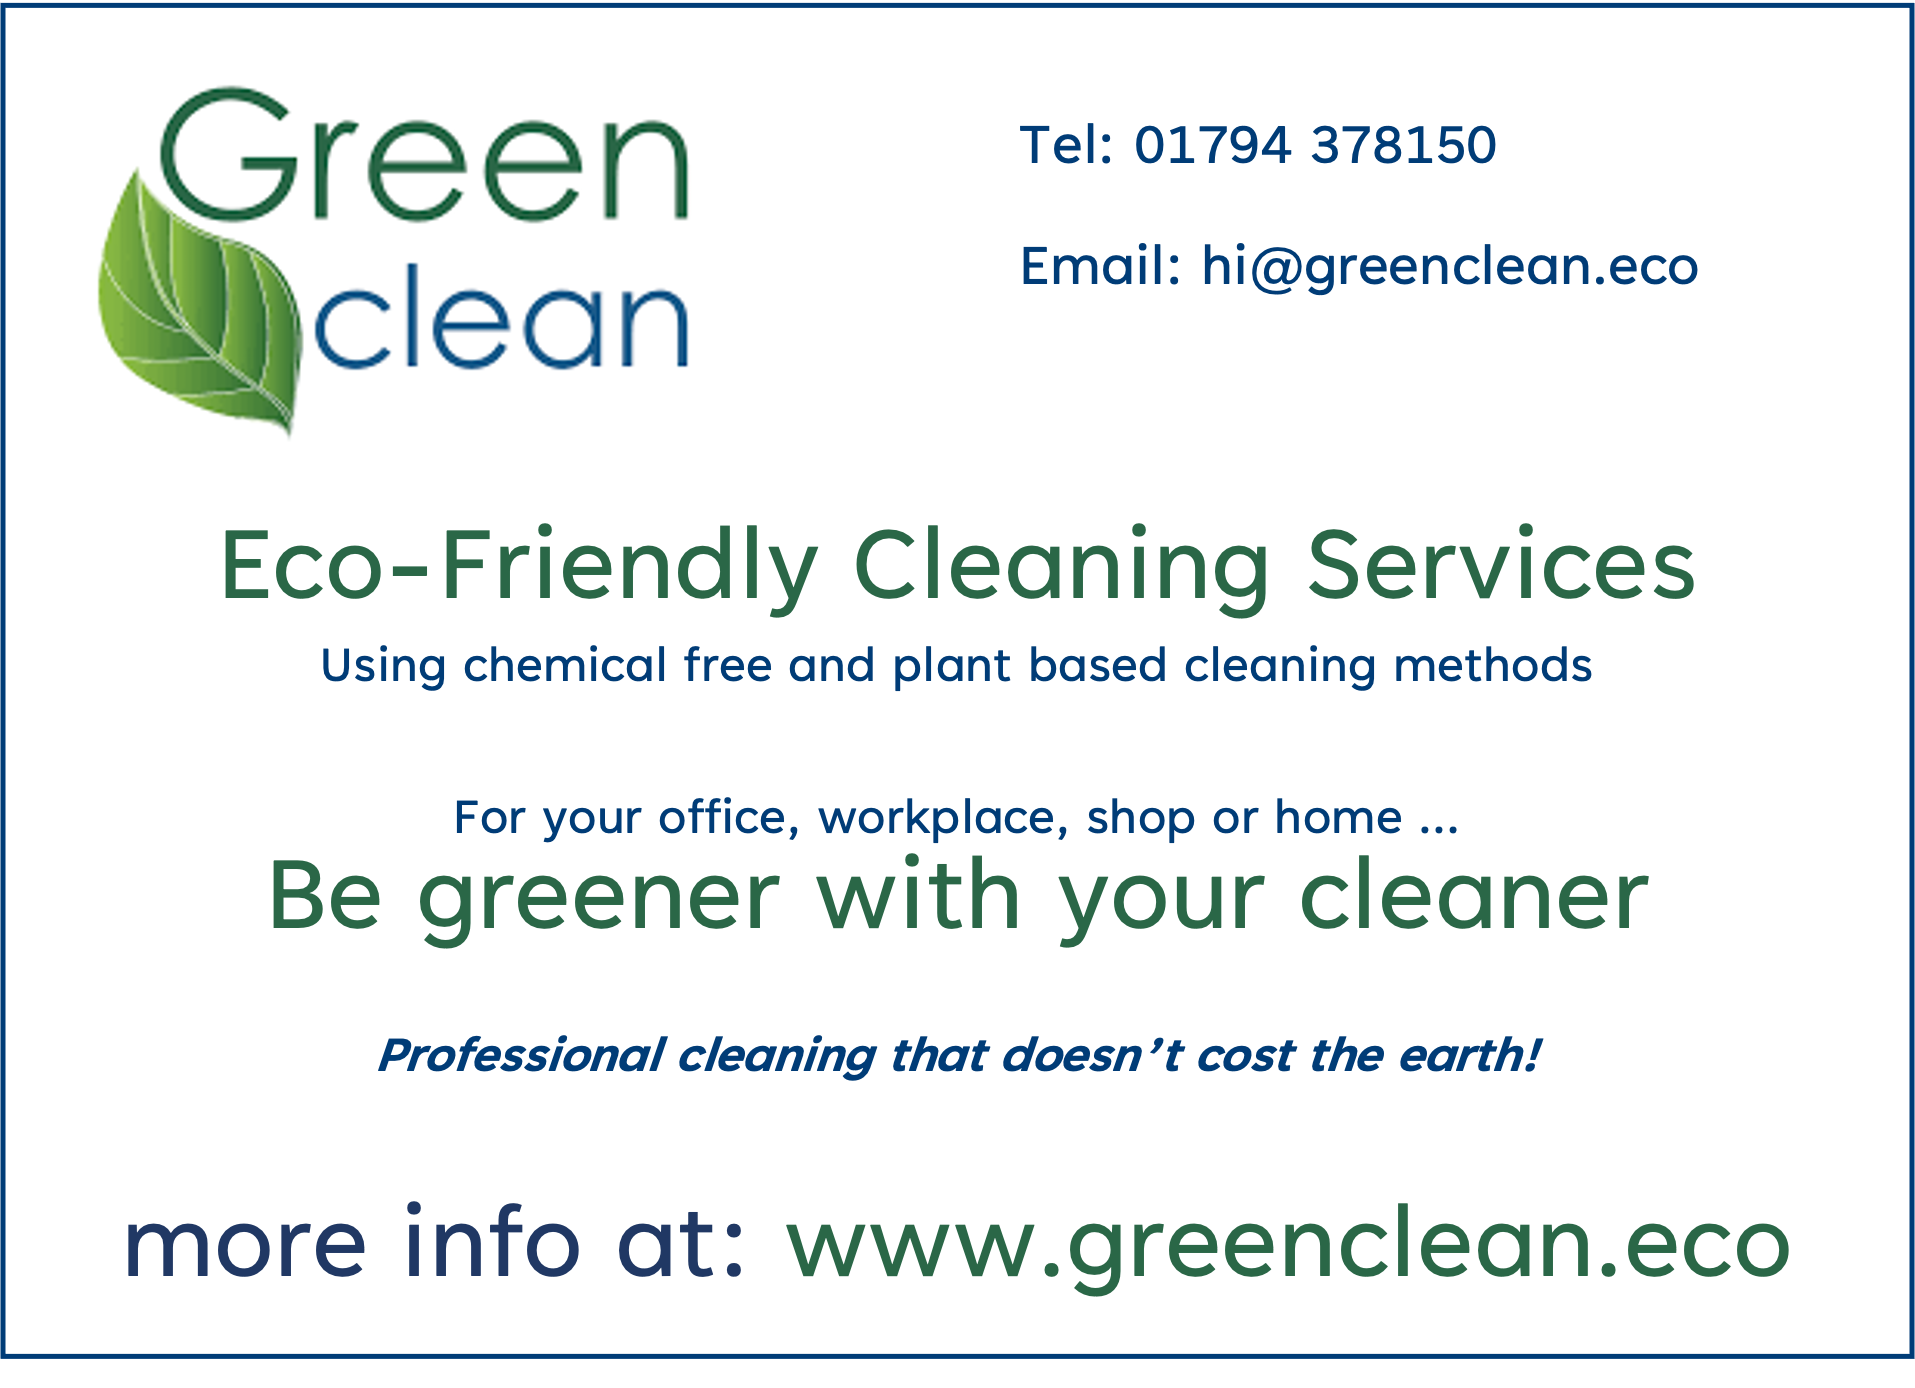 Cleaning Help - Green Clean